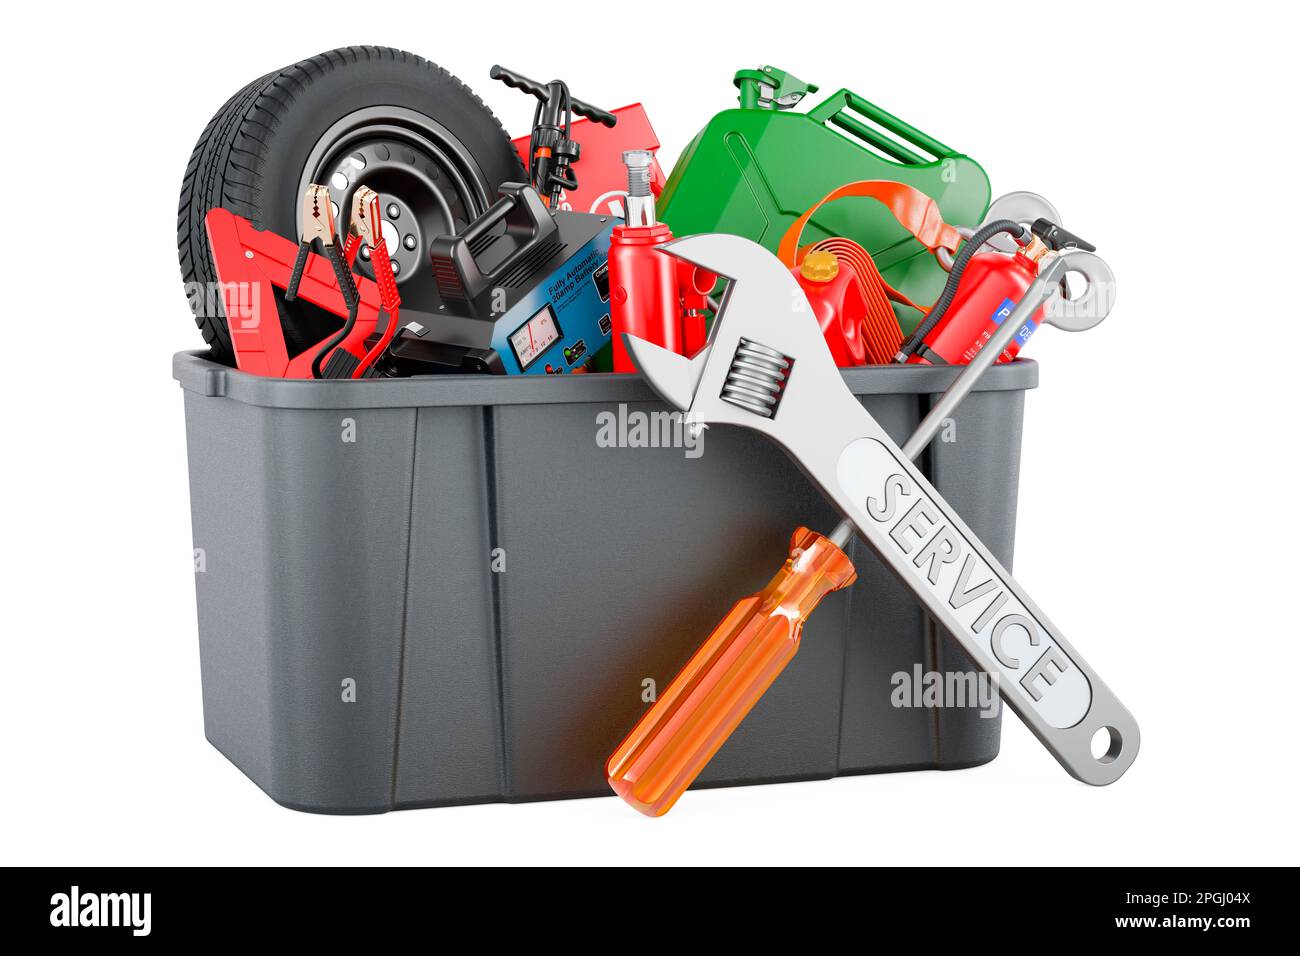 https://c8.alamy.com/comp/2PGJ04X/plastic-box-full-of-car-tools-equipment-and-accessories-with-screwdriver-and-wrench-3d-rendering-isolated-on-white-background-2PGJ04X.jpg